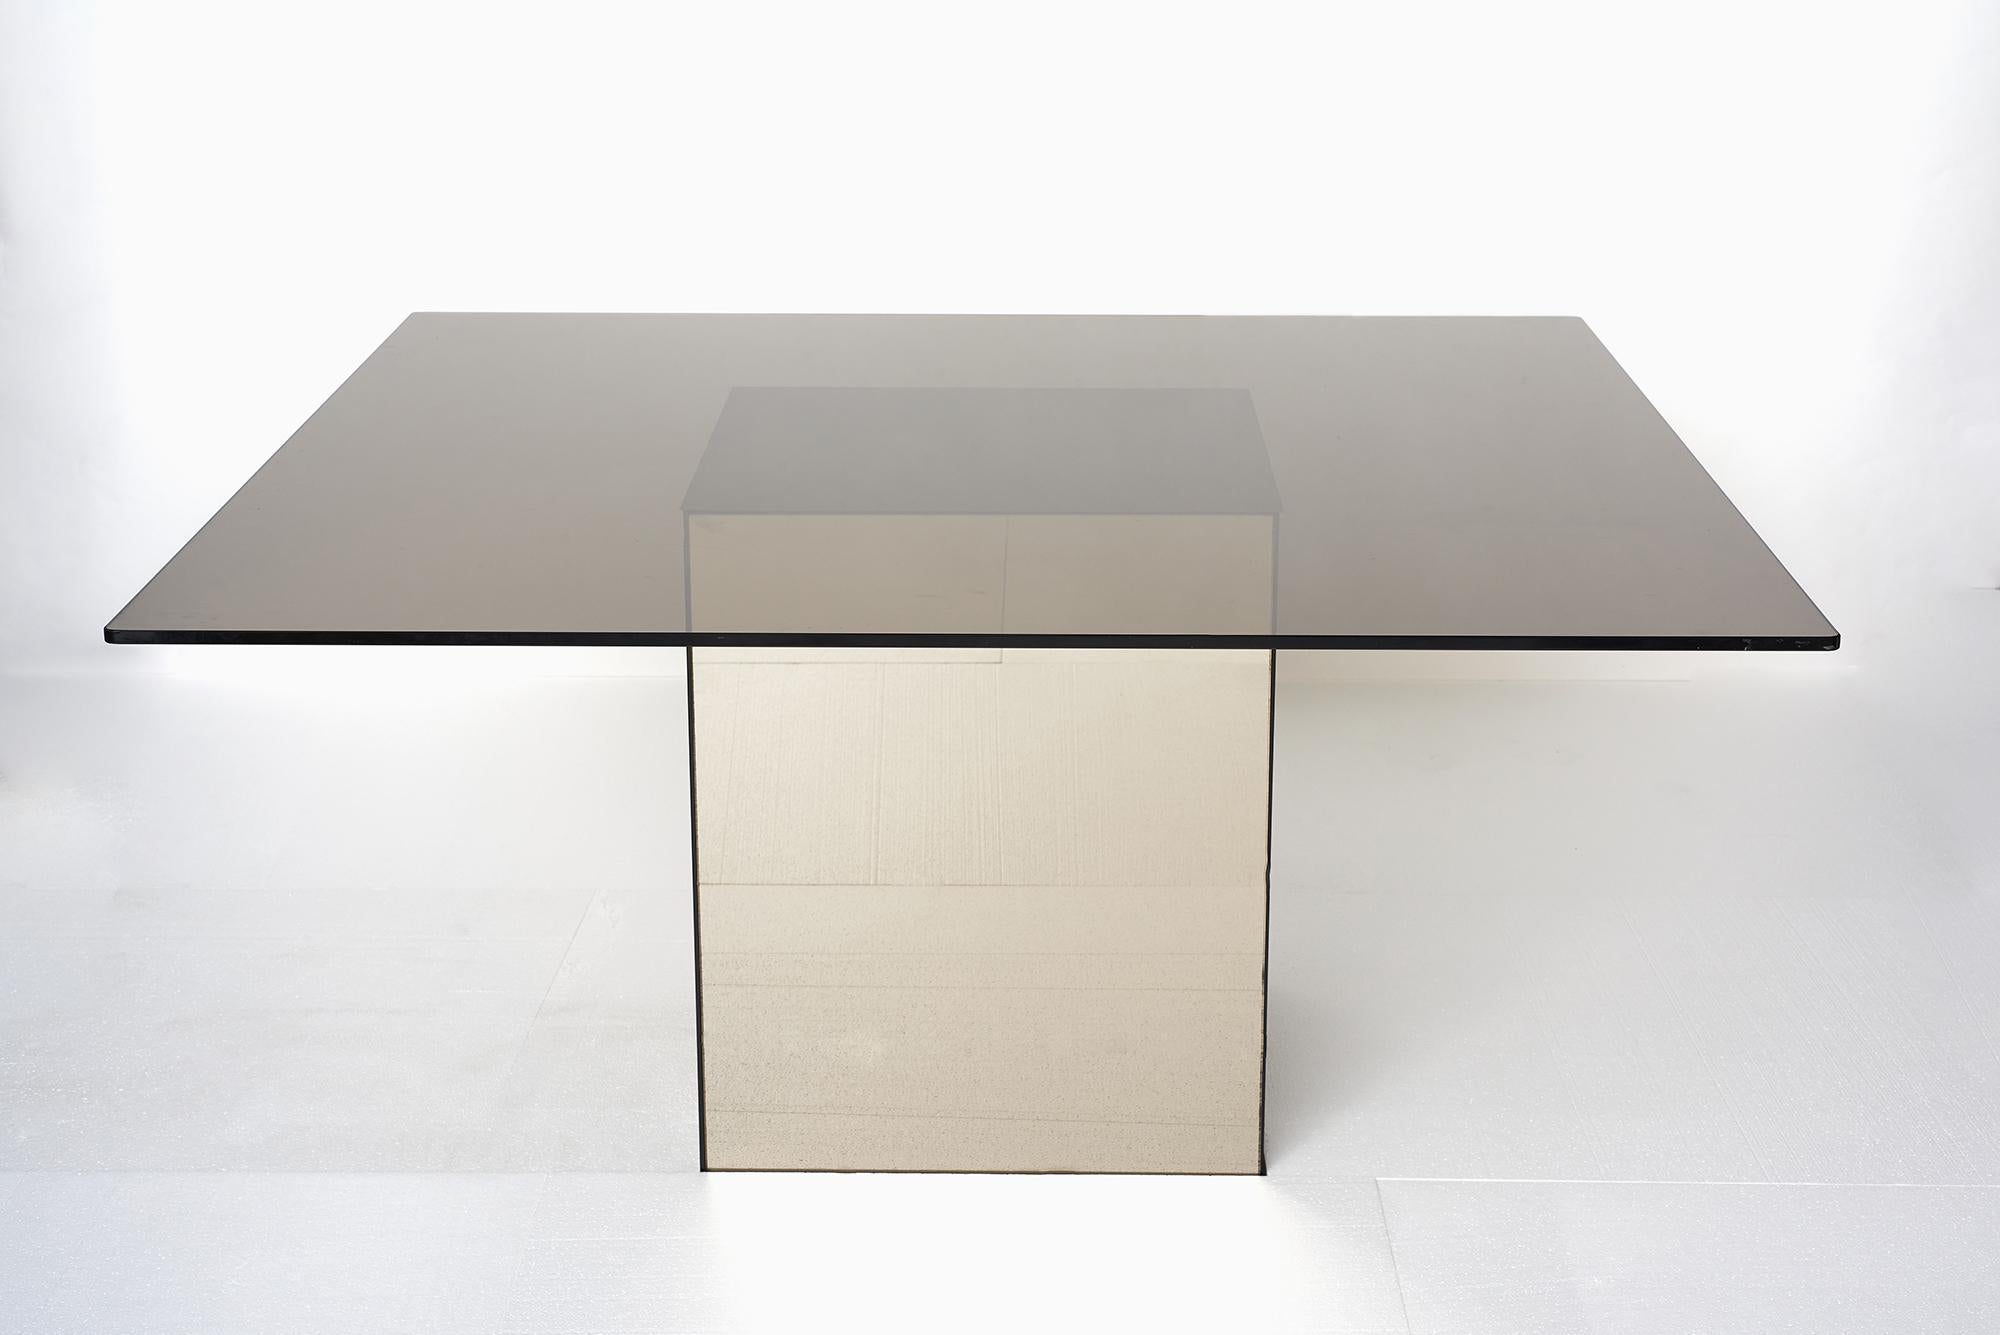 ‘Blok’ bronze mirror dining table designed by Nanda Vigo for Acerbis, Italy 1971.
Nanda Vigo’s work is interdisciplinary, combining art, design, architecture and the environment, and she was involved with numerous projects as an architect, designer